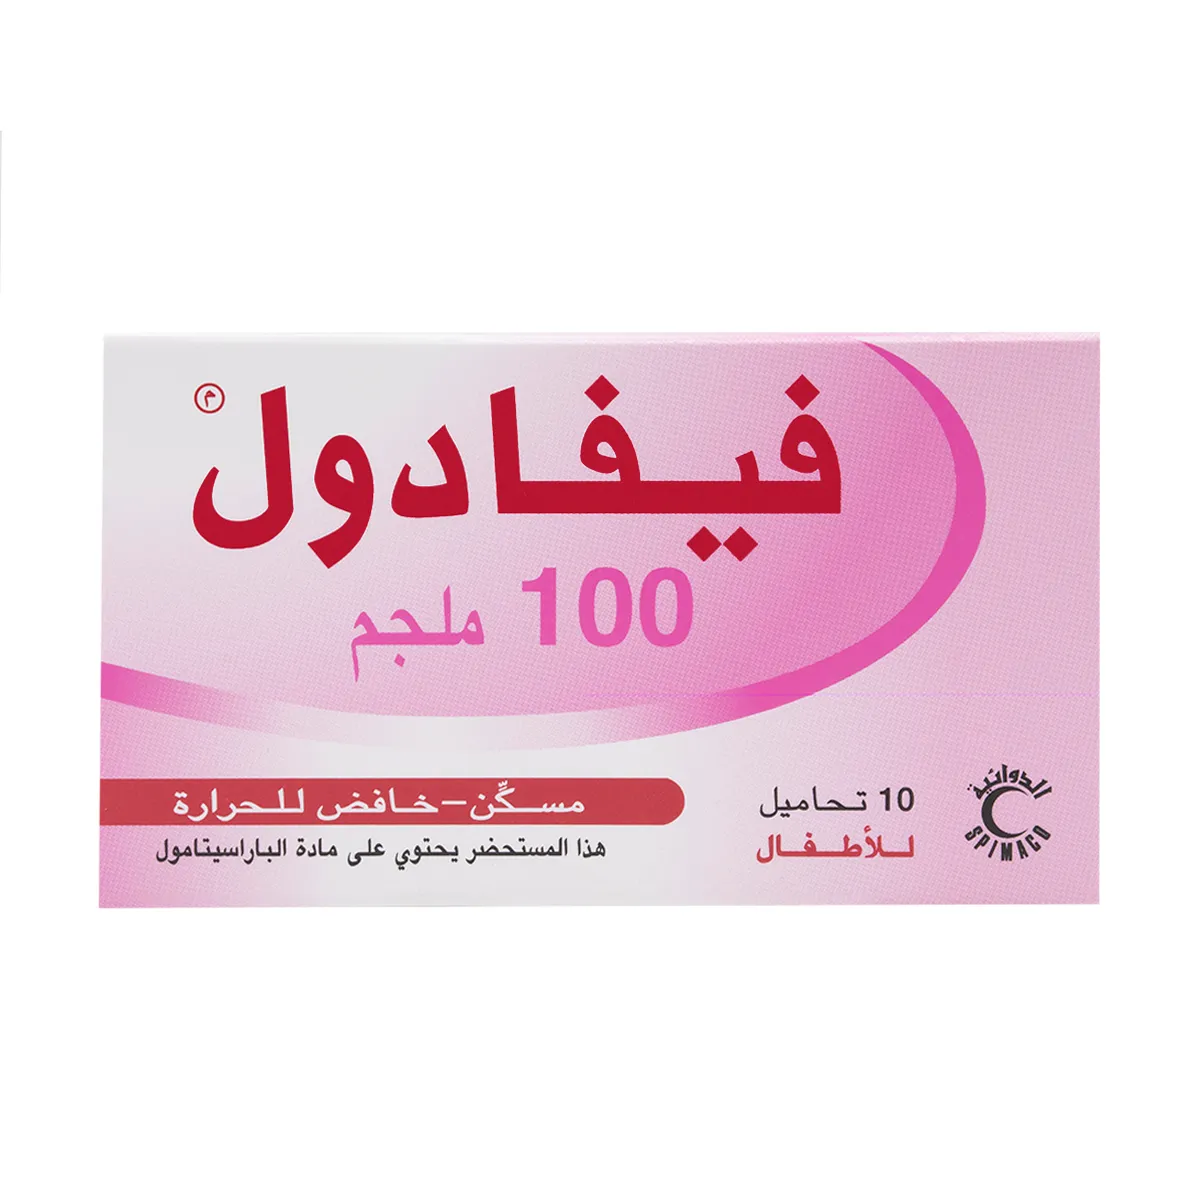 Fevadol 100 mg Suppository 10pcs